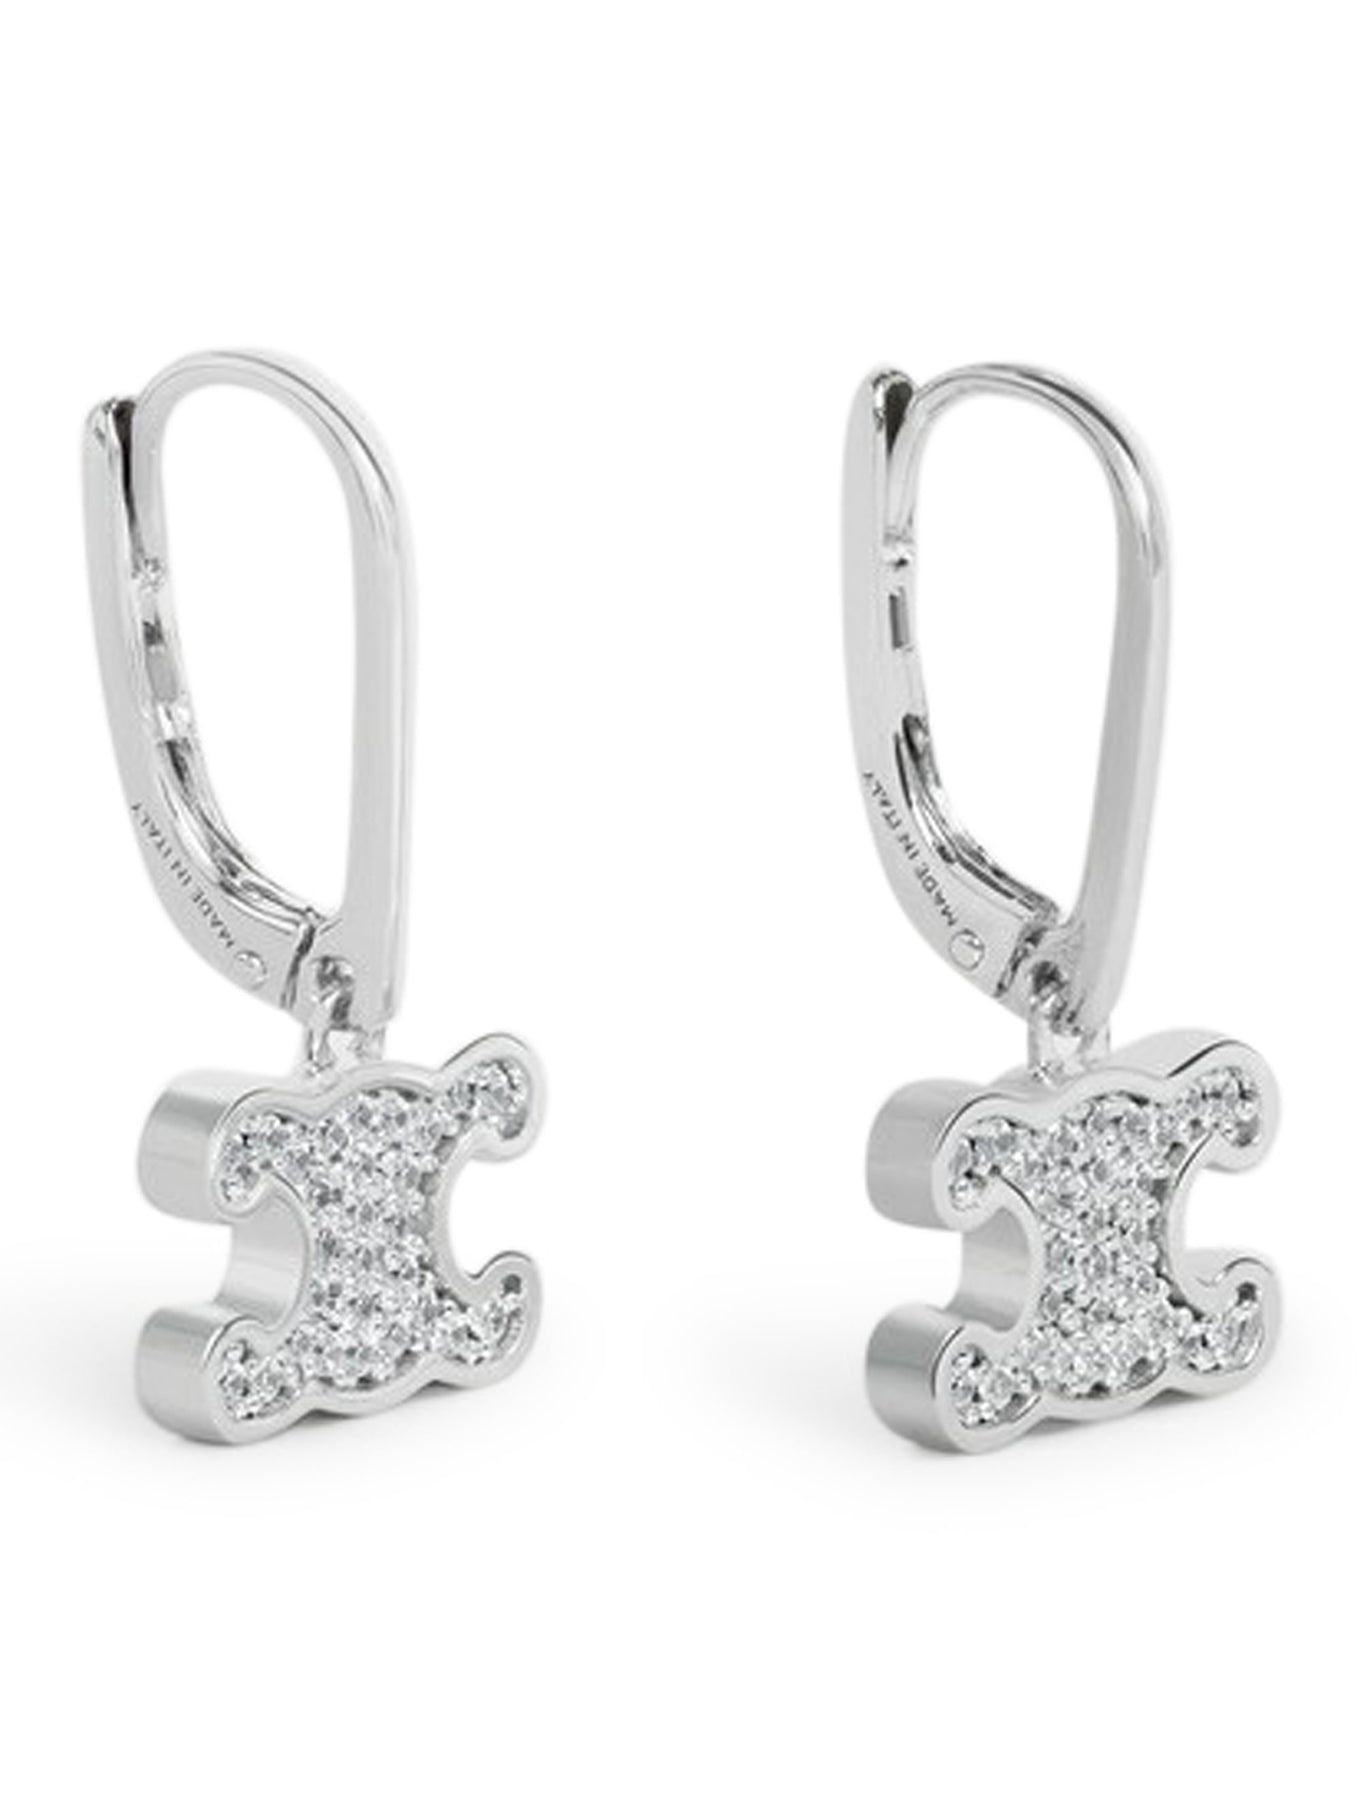 TRIOMPHE EARRINGS WITH RHODIUM-PLATED BRASS RHINESTONE AND SILVER CRYSTALS